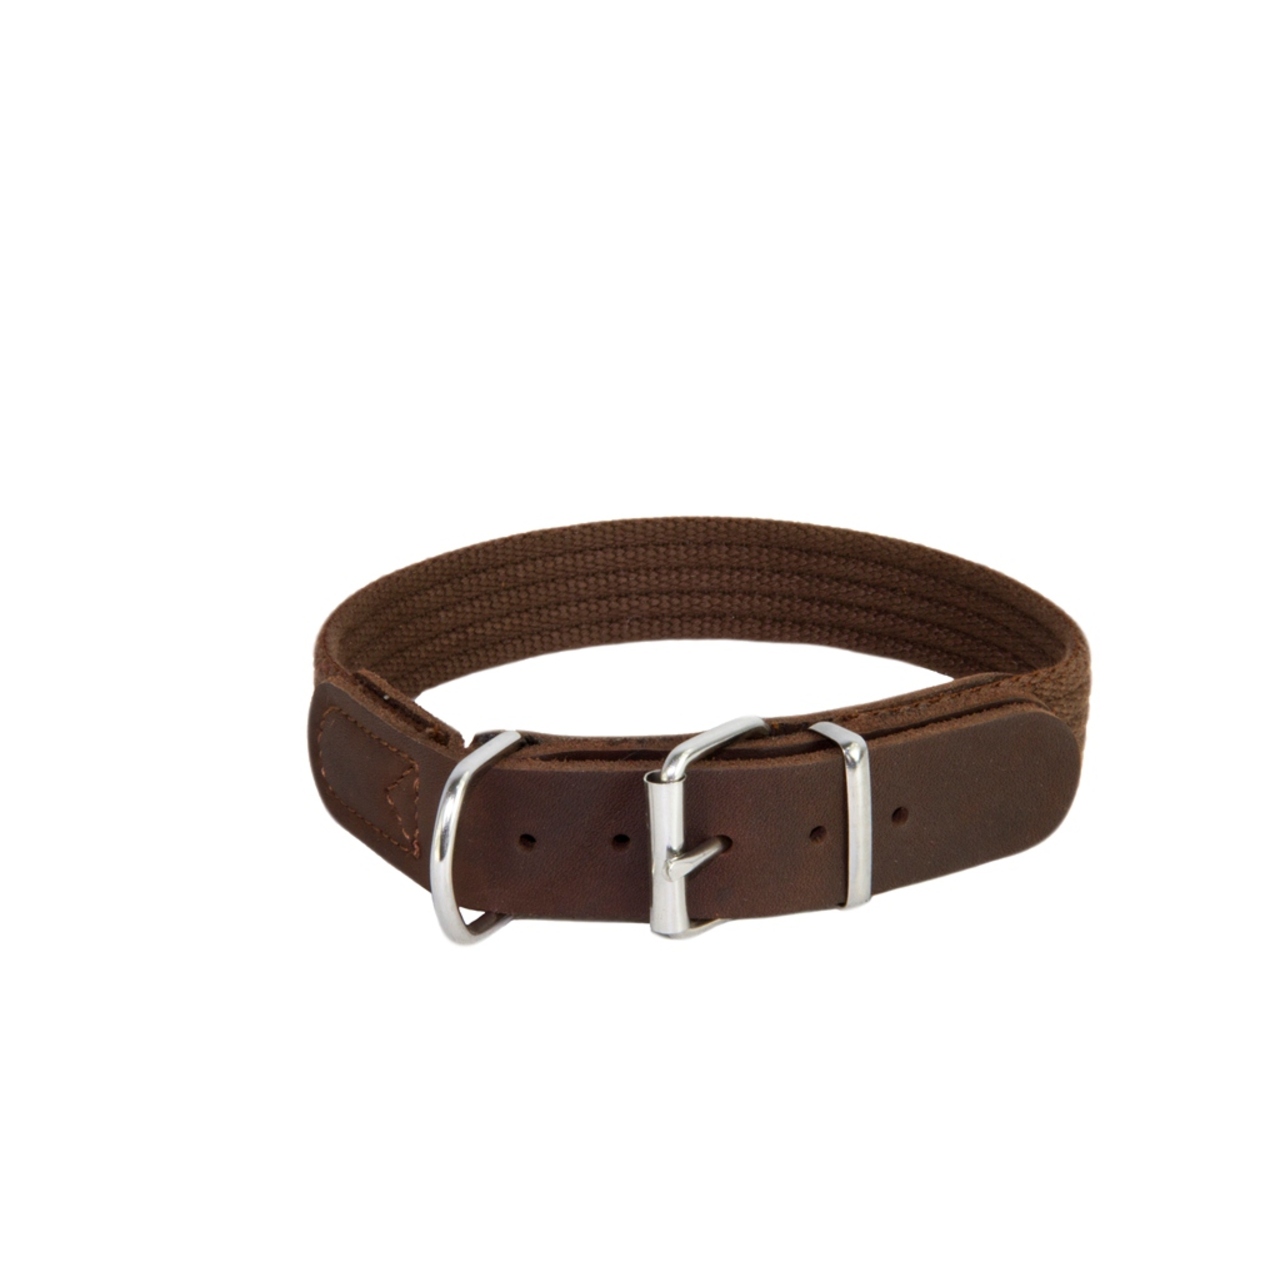 An image of Earthbound Cotton Brown Collar 41 - 47cm